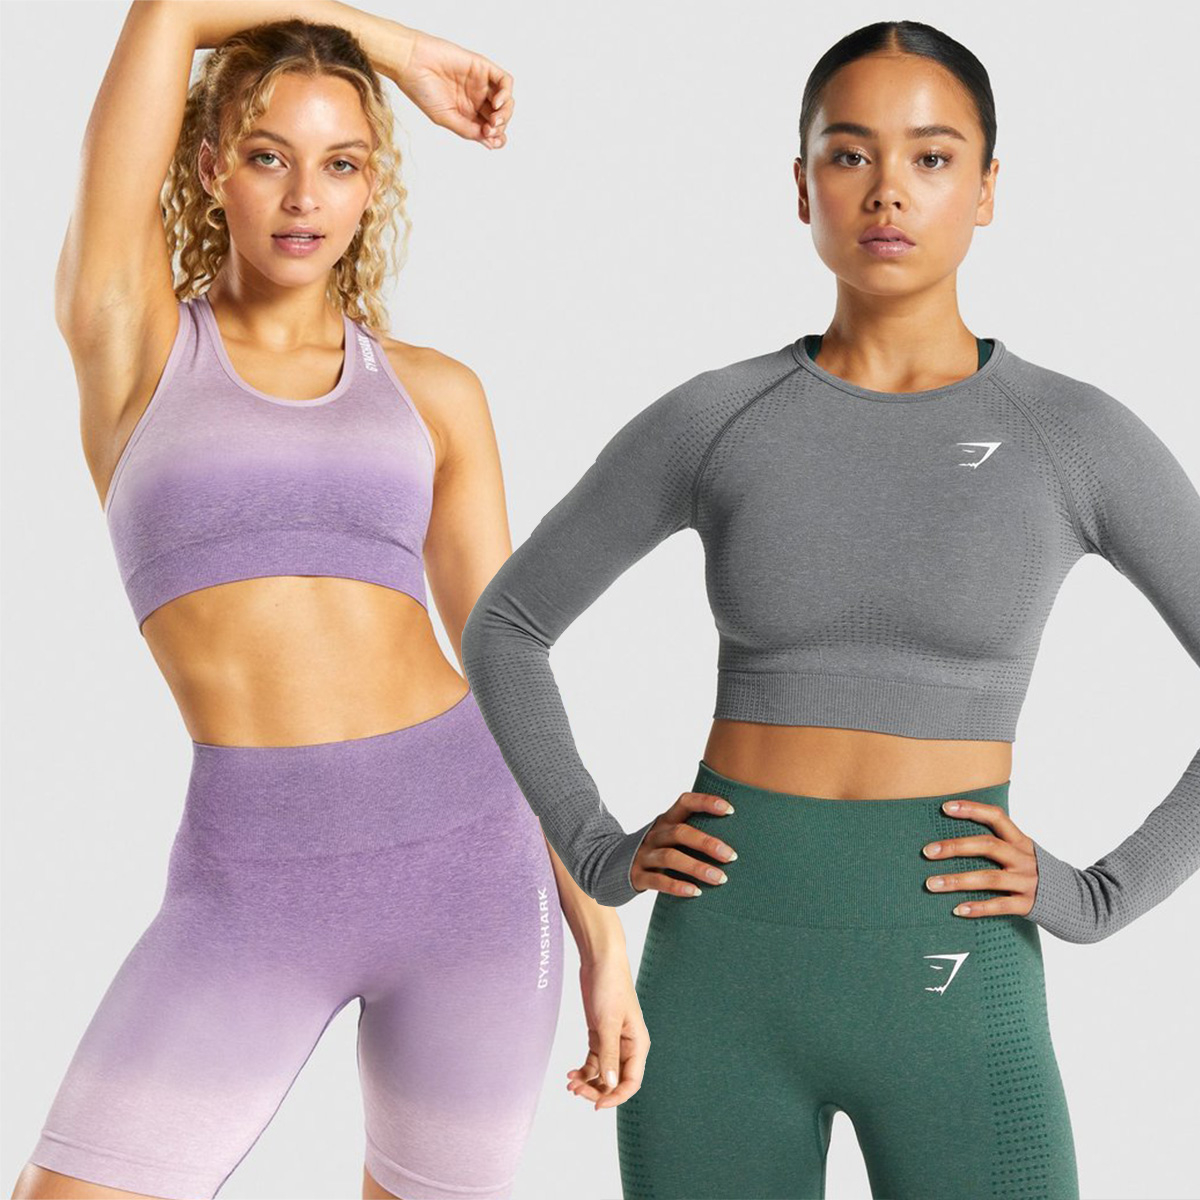 Gymshark Is Having a Major Spring Sale with 50 Percent Off Activewear